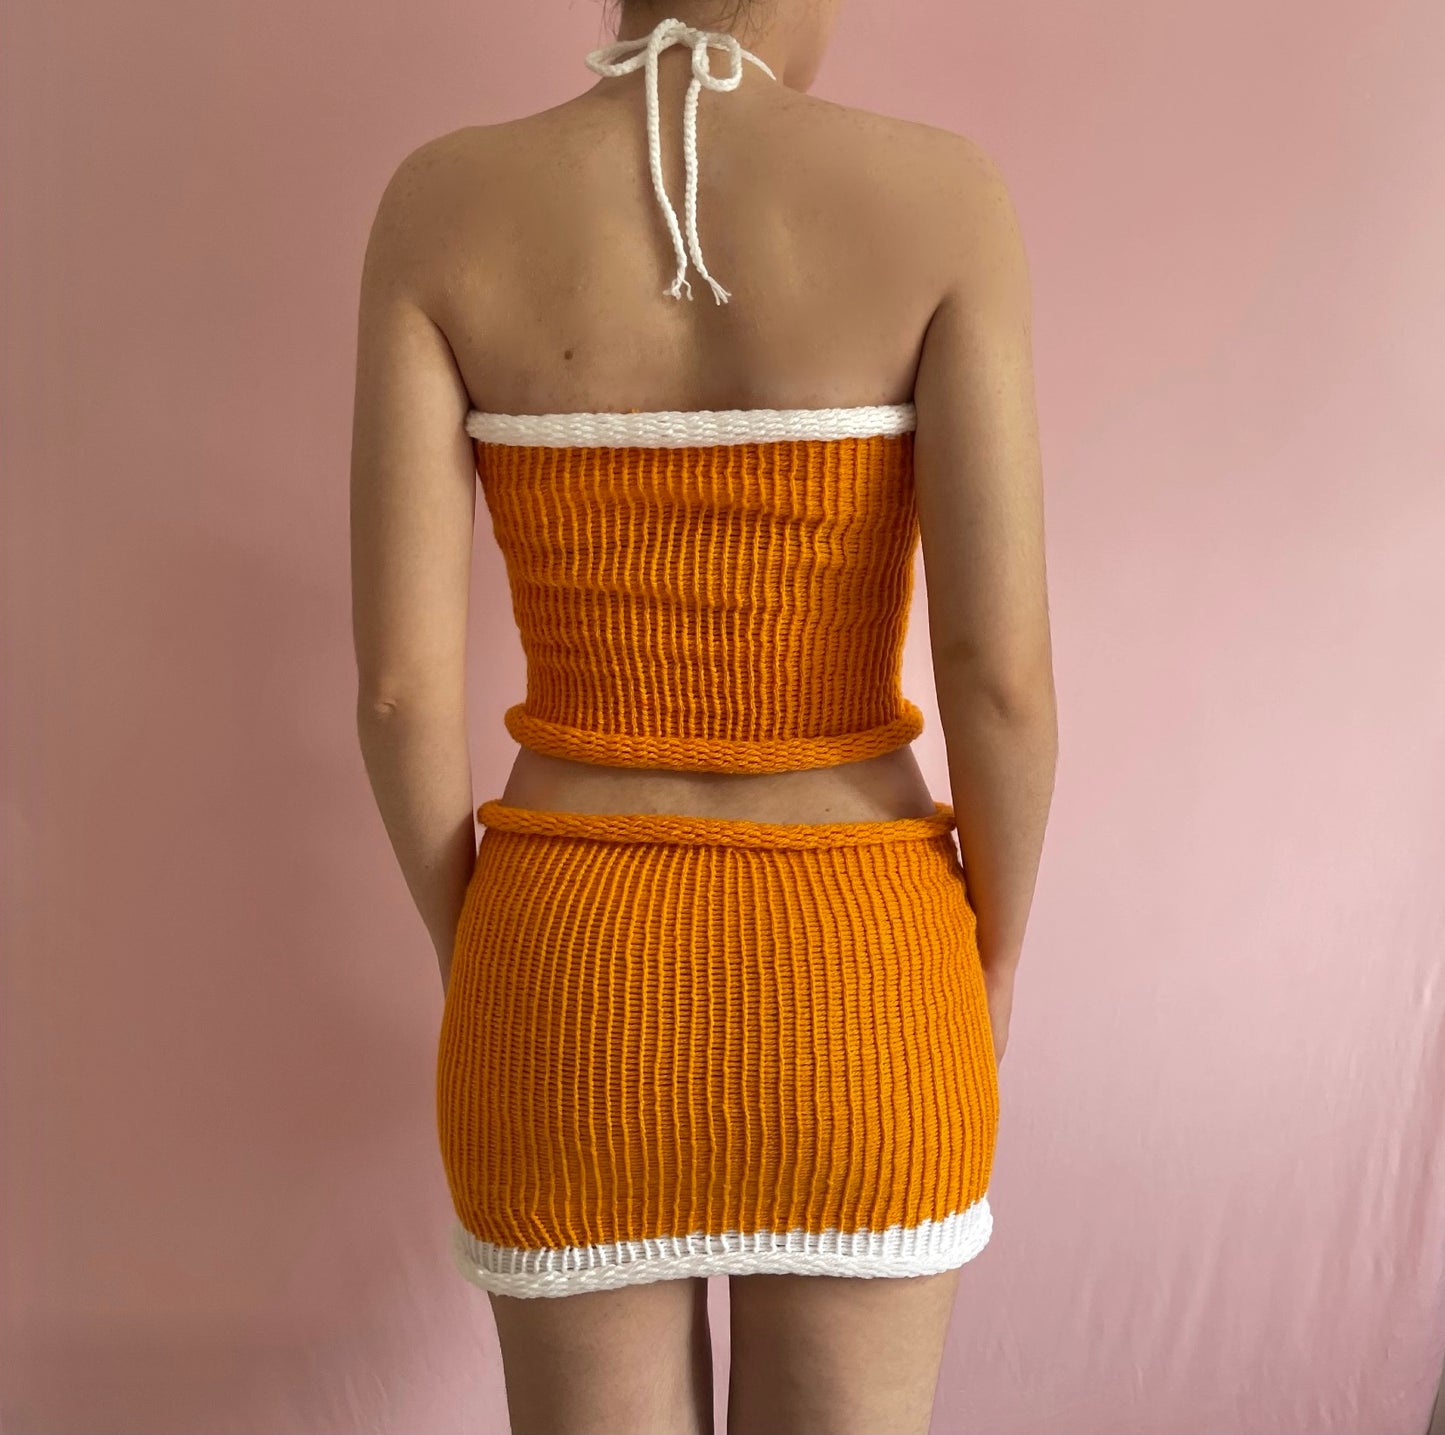 Handmade knitted colour block halter top in orange and white